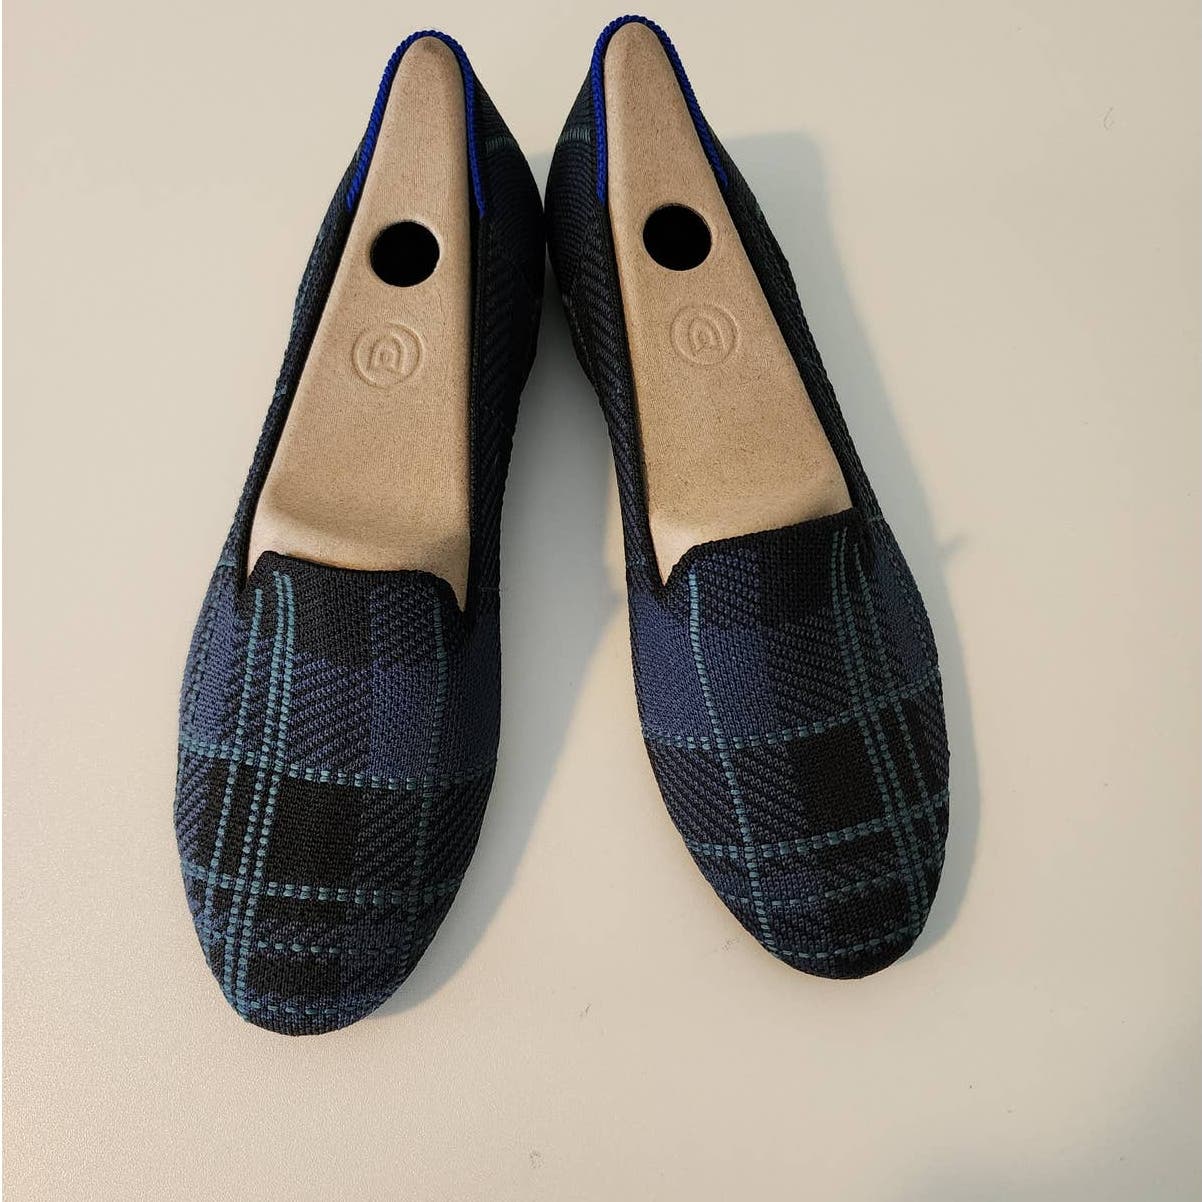 Rothy's Indigo Gingham Loafers Size 8.5